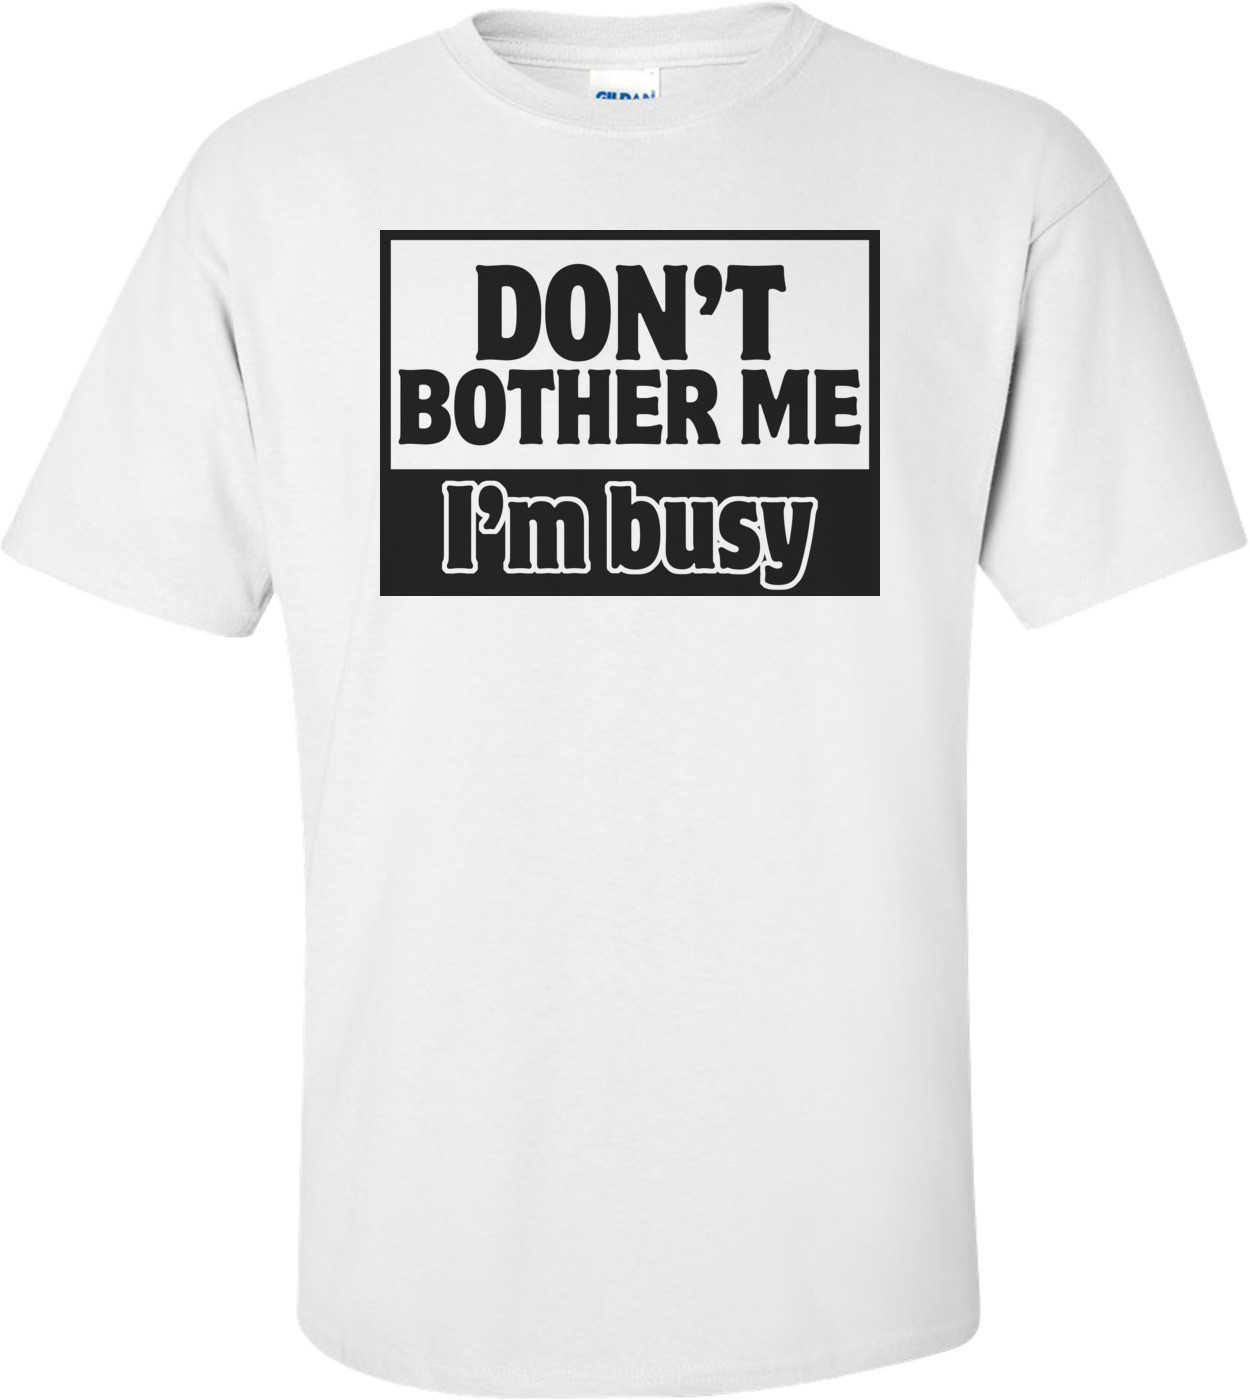 Don't Bother Me, I'm Busy Funny Shirt